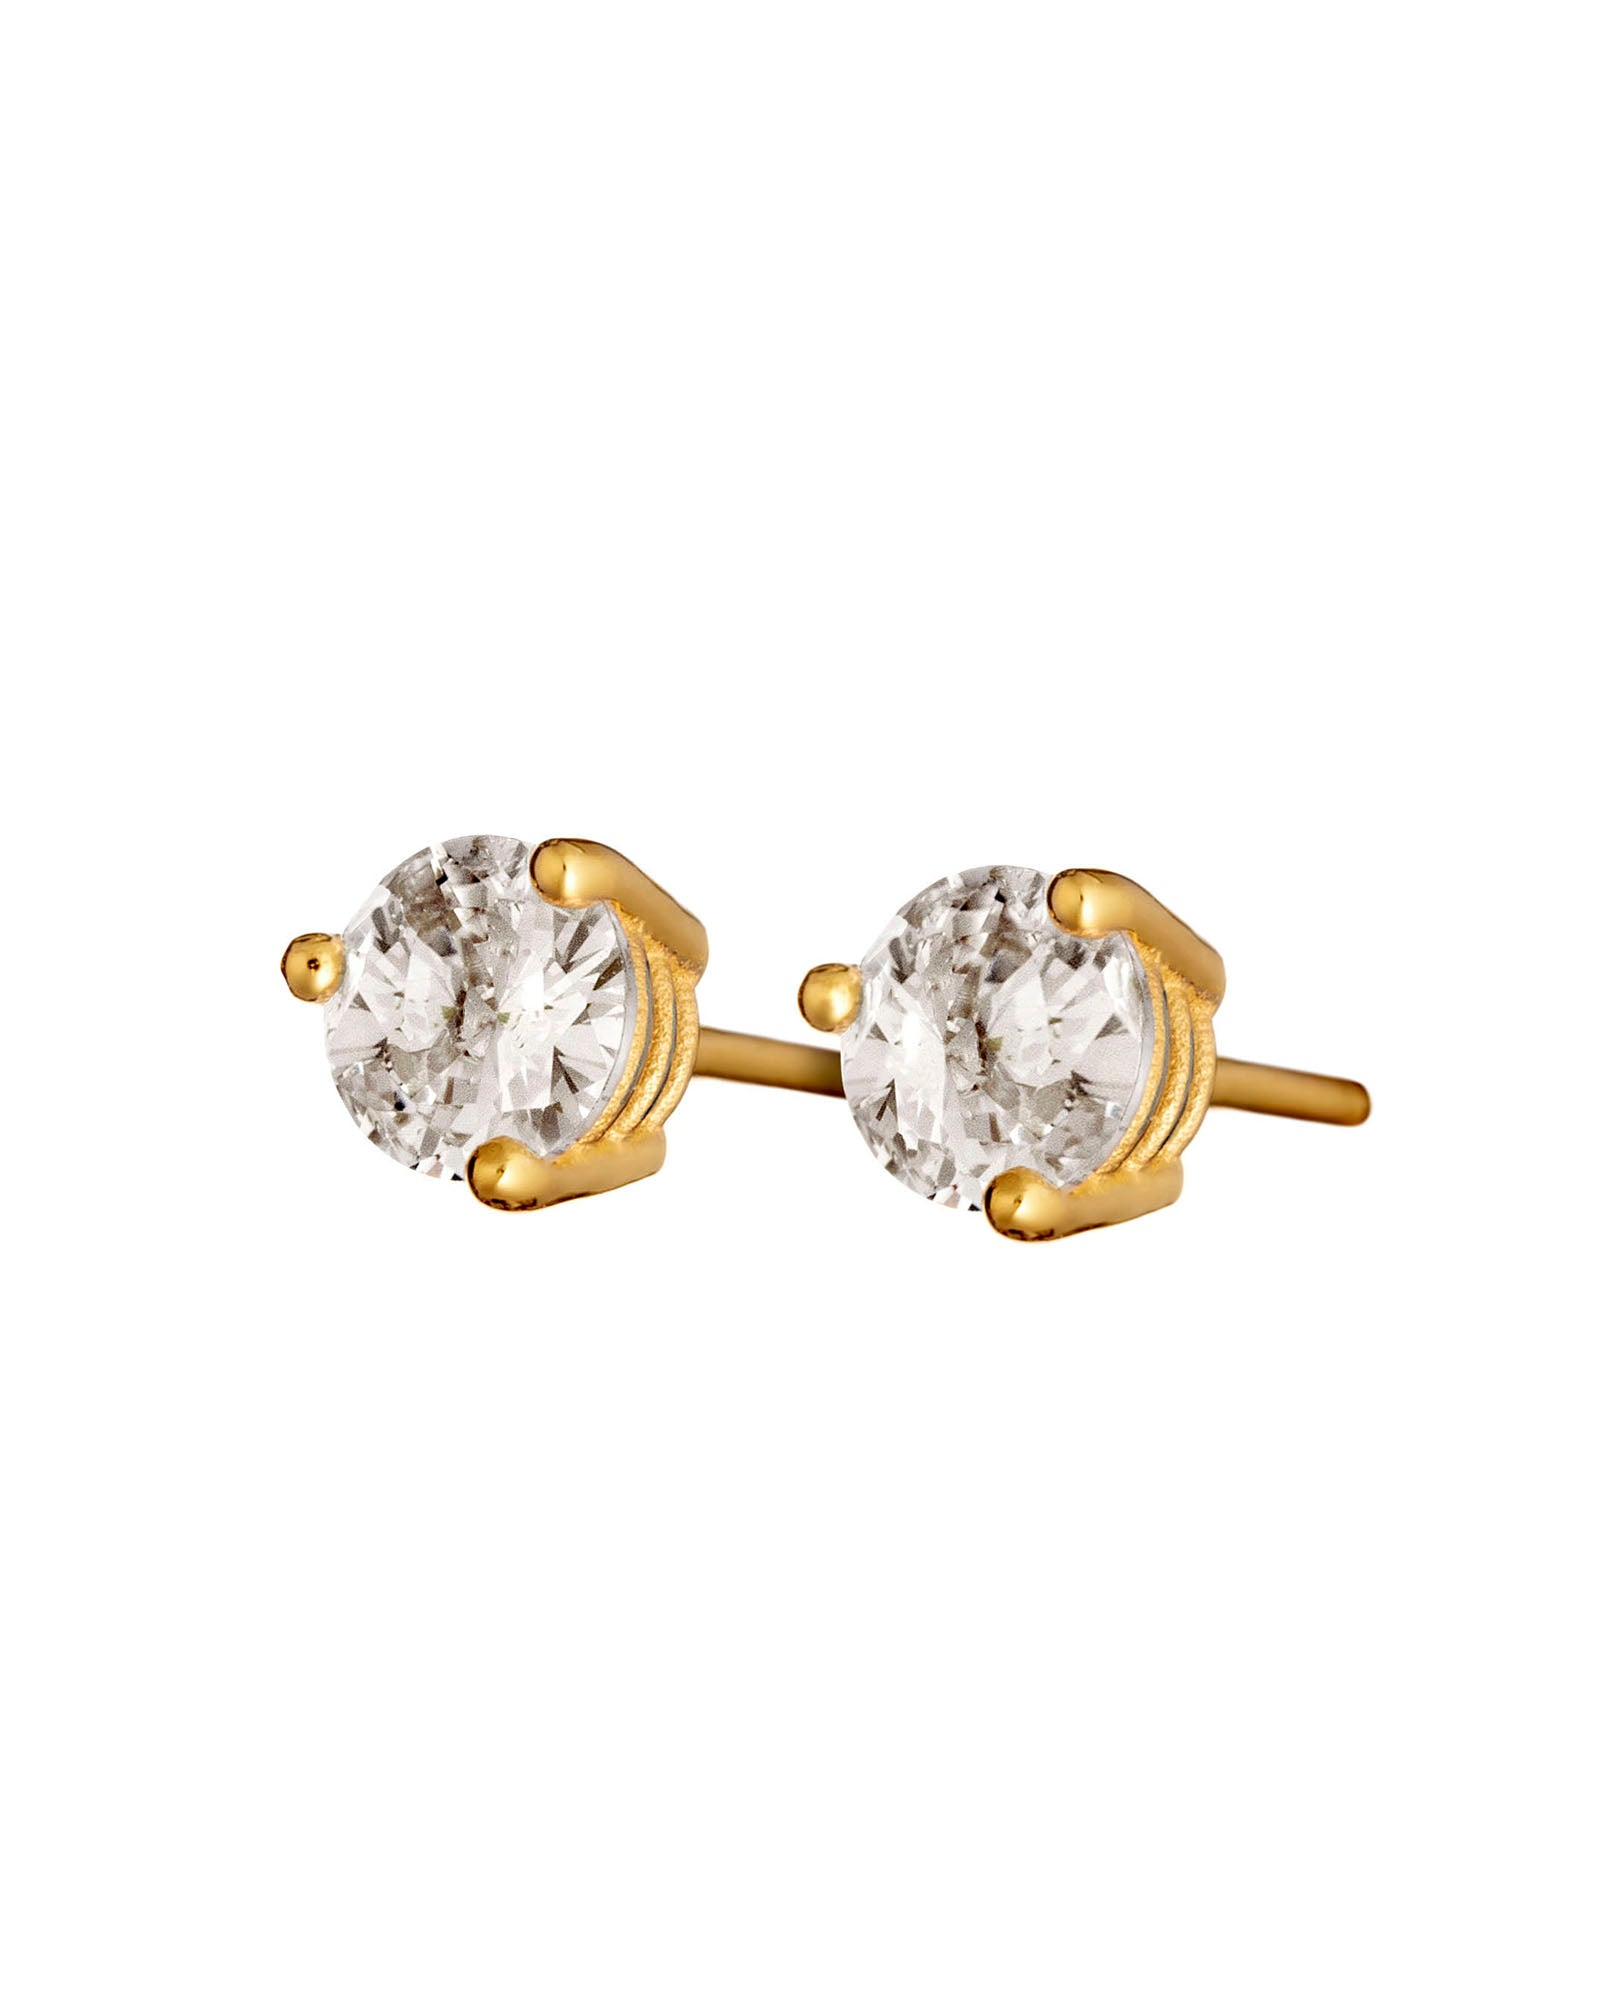 Sale! Crystal Solitaire Studs 5mm